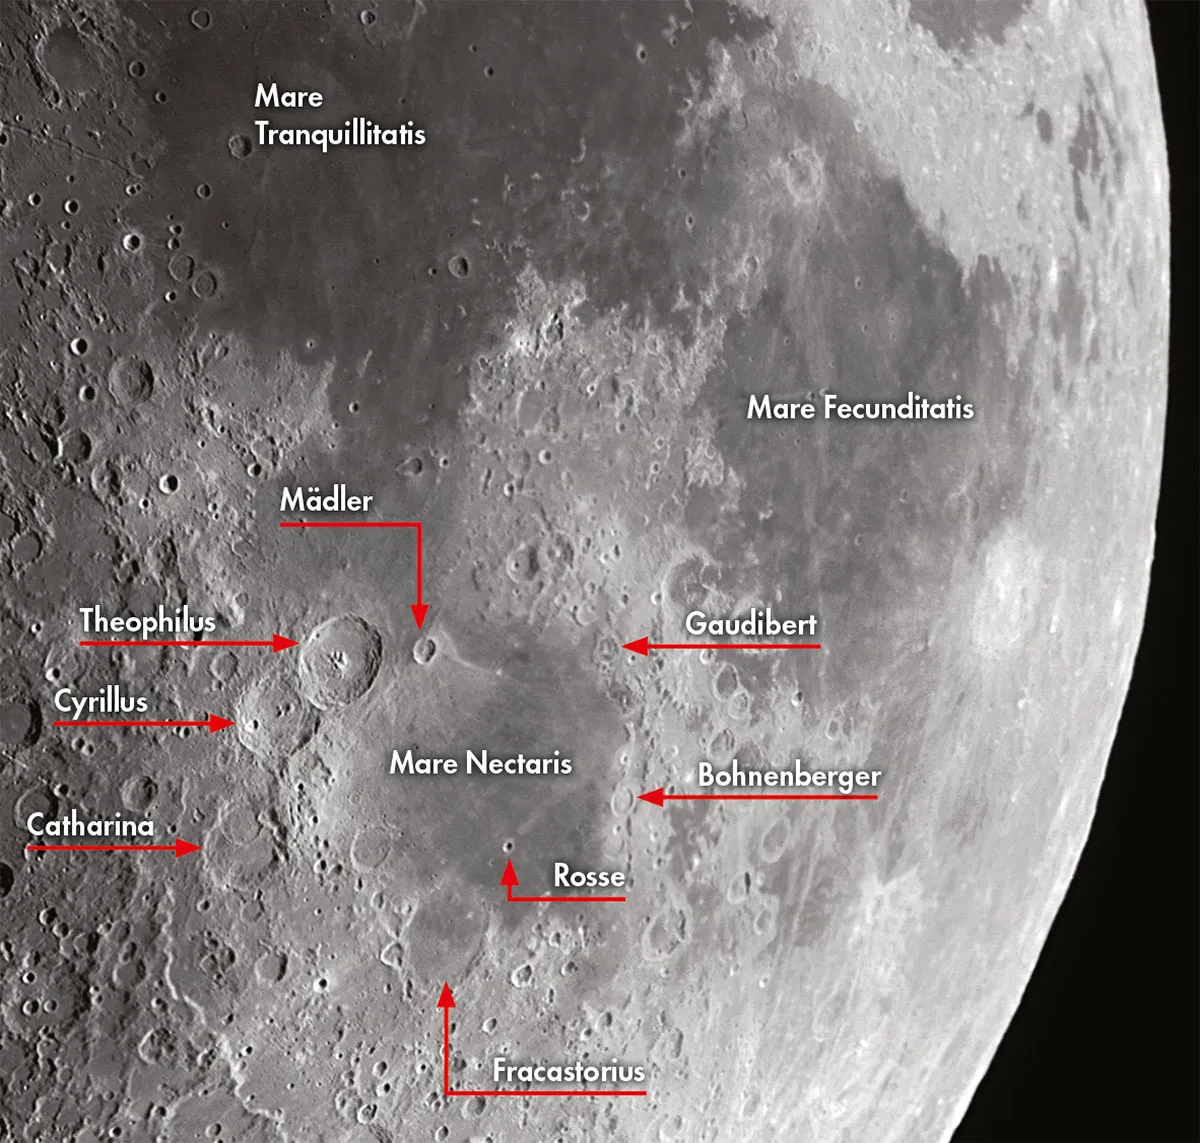 An annotated diagram of Mare Nectaris.